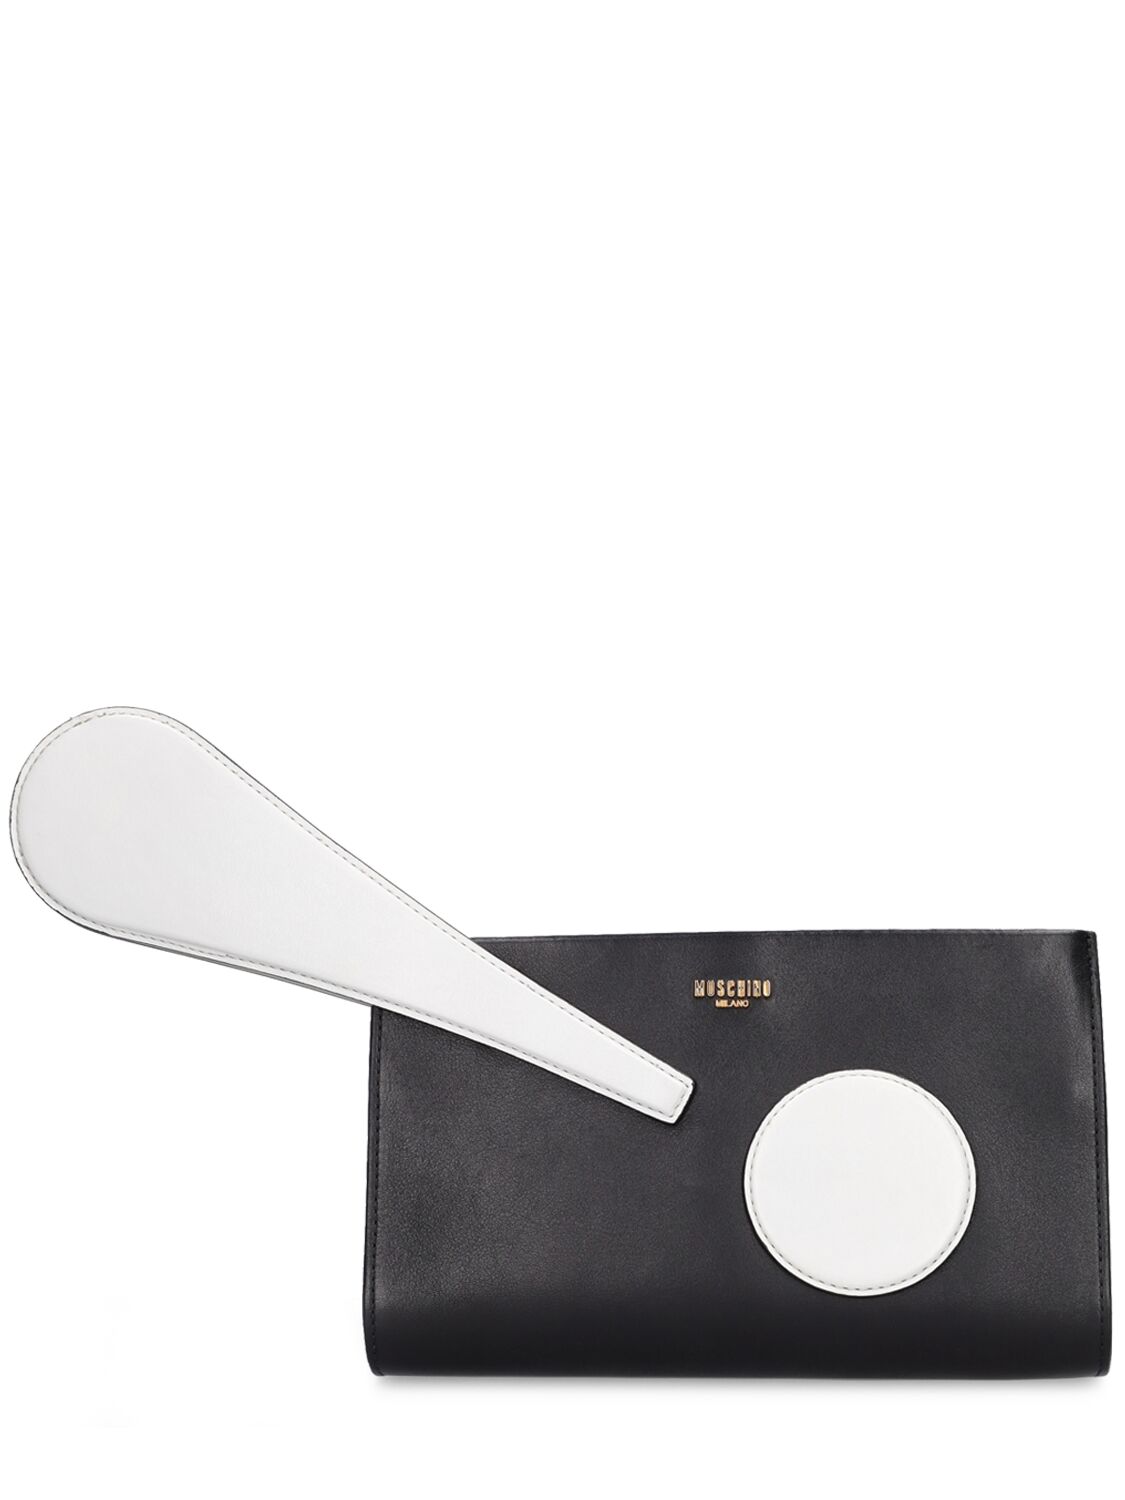 Moschino Gone With The Wind Leather Clutch In Black